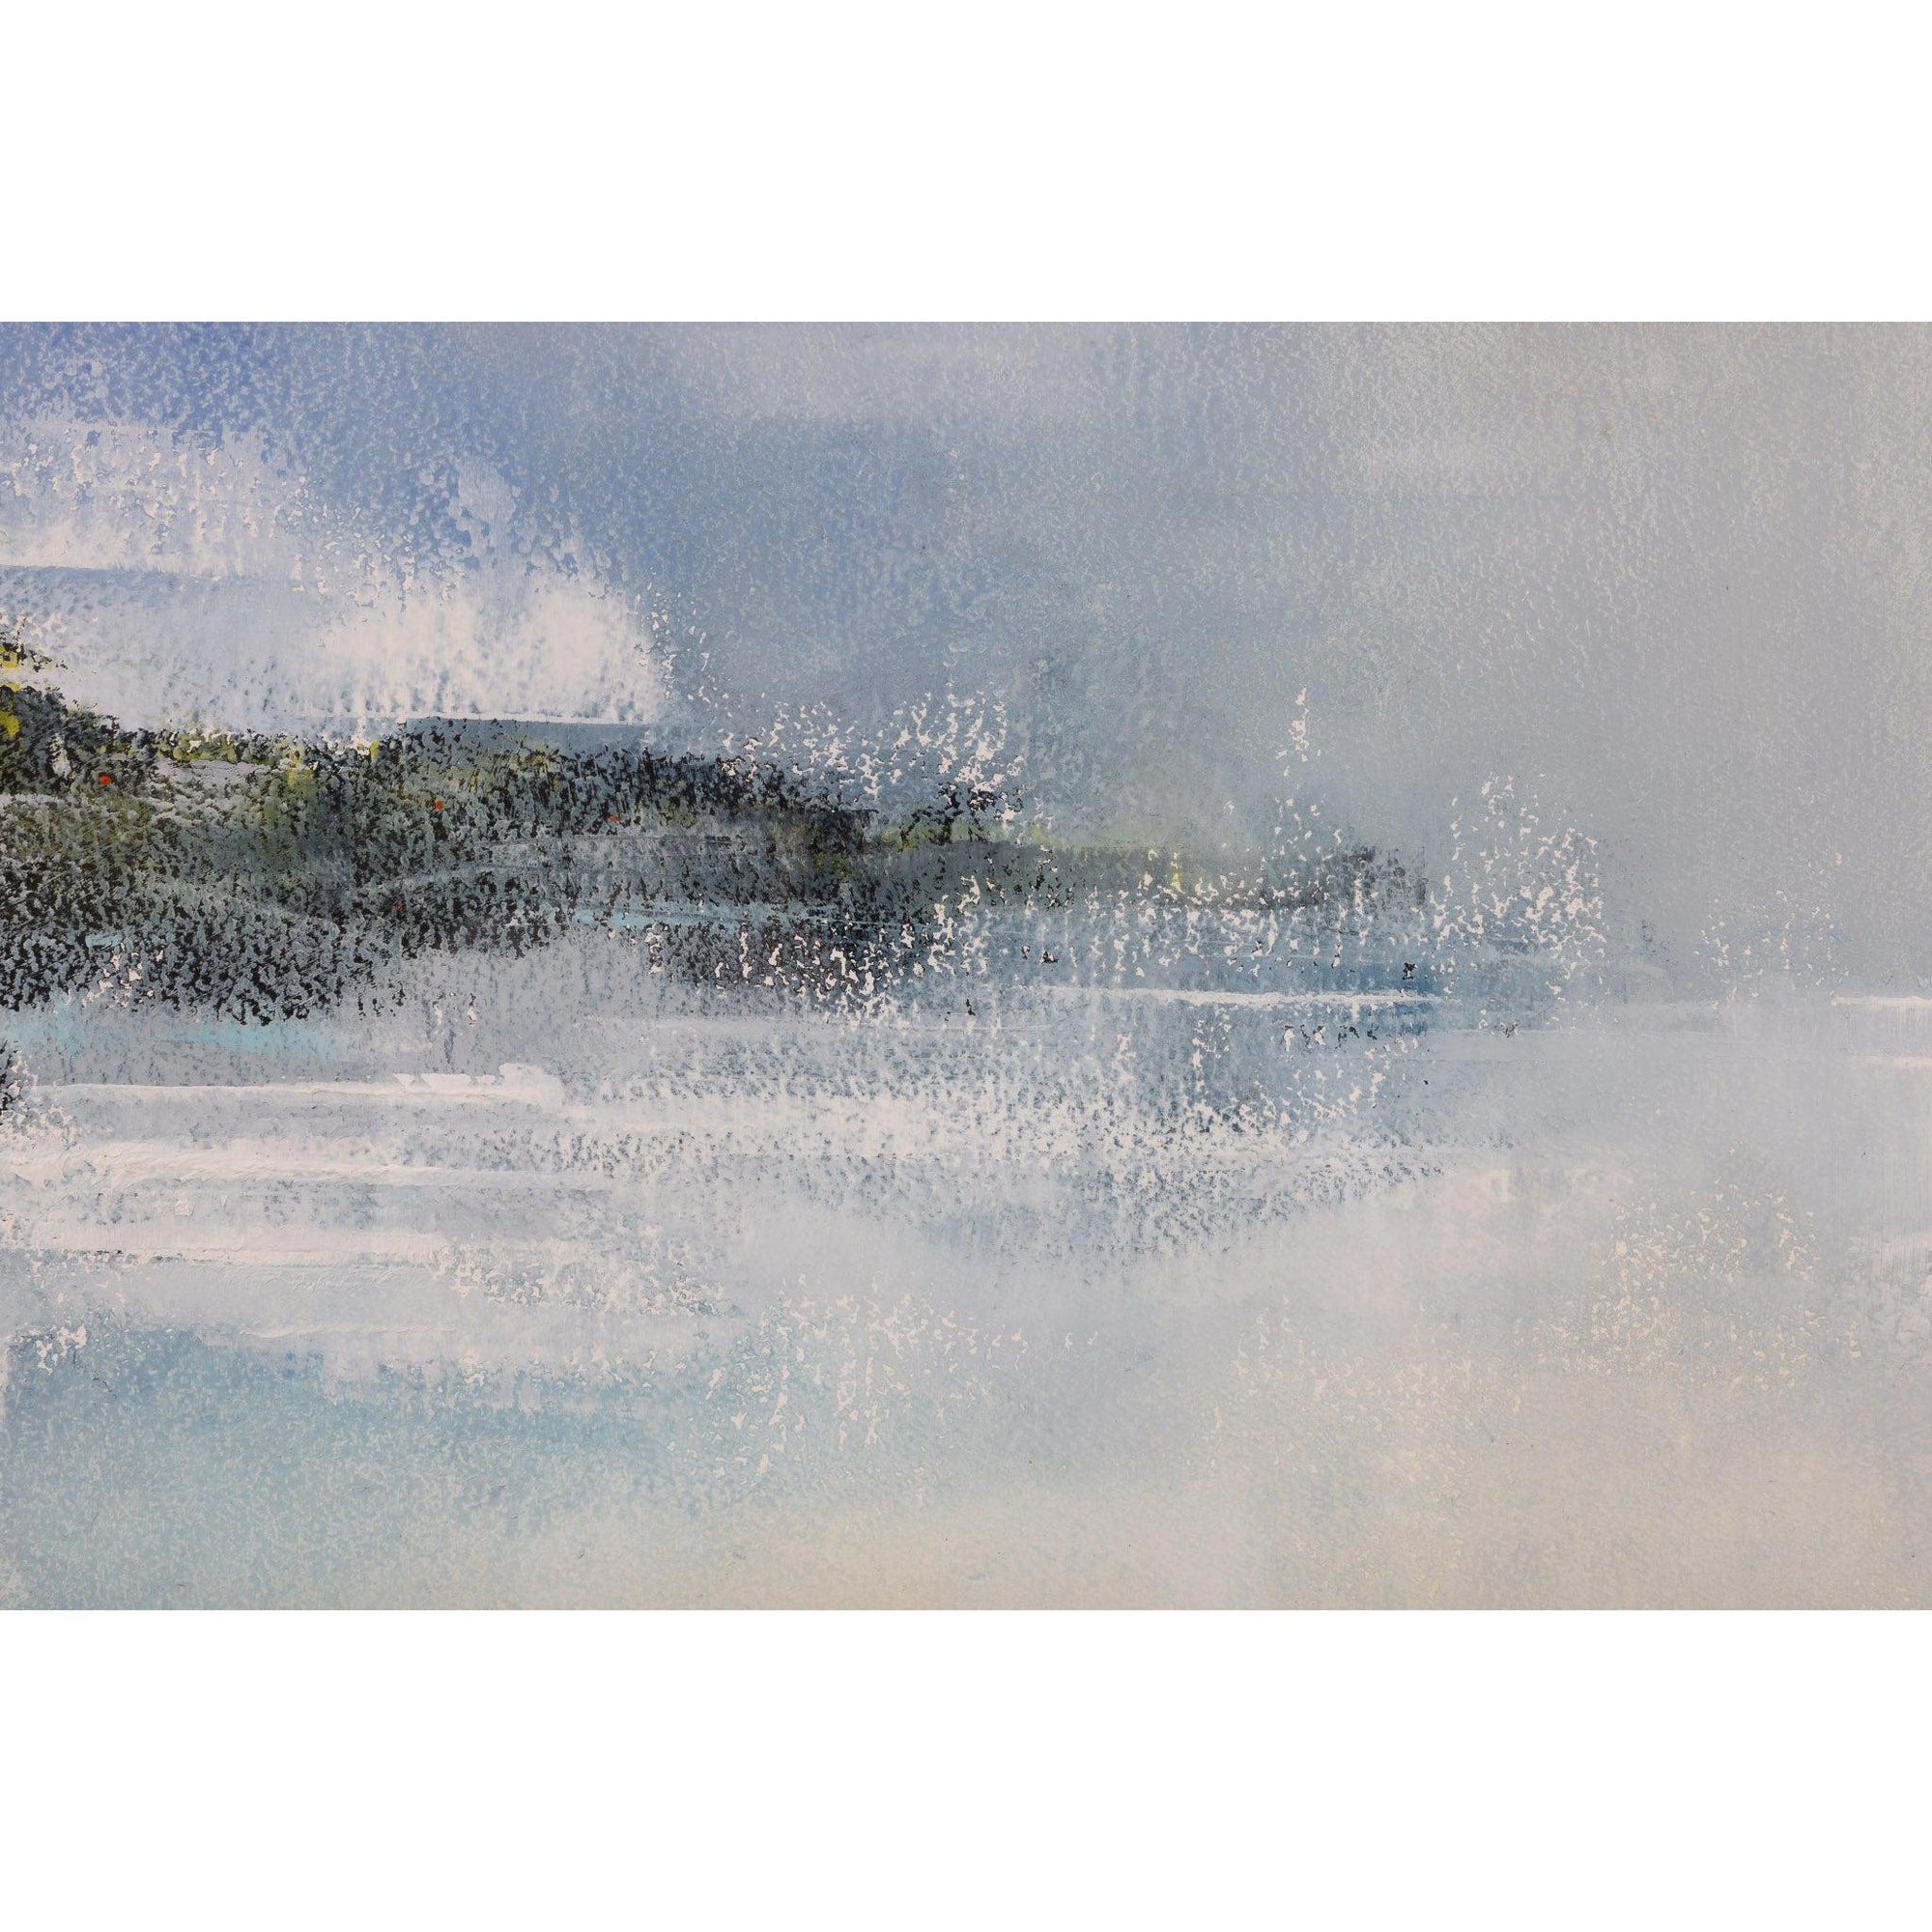 'The Other Side' oil on paper by Ben Lucas, available at Padstow Gallery, Cornwall